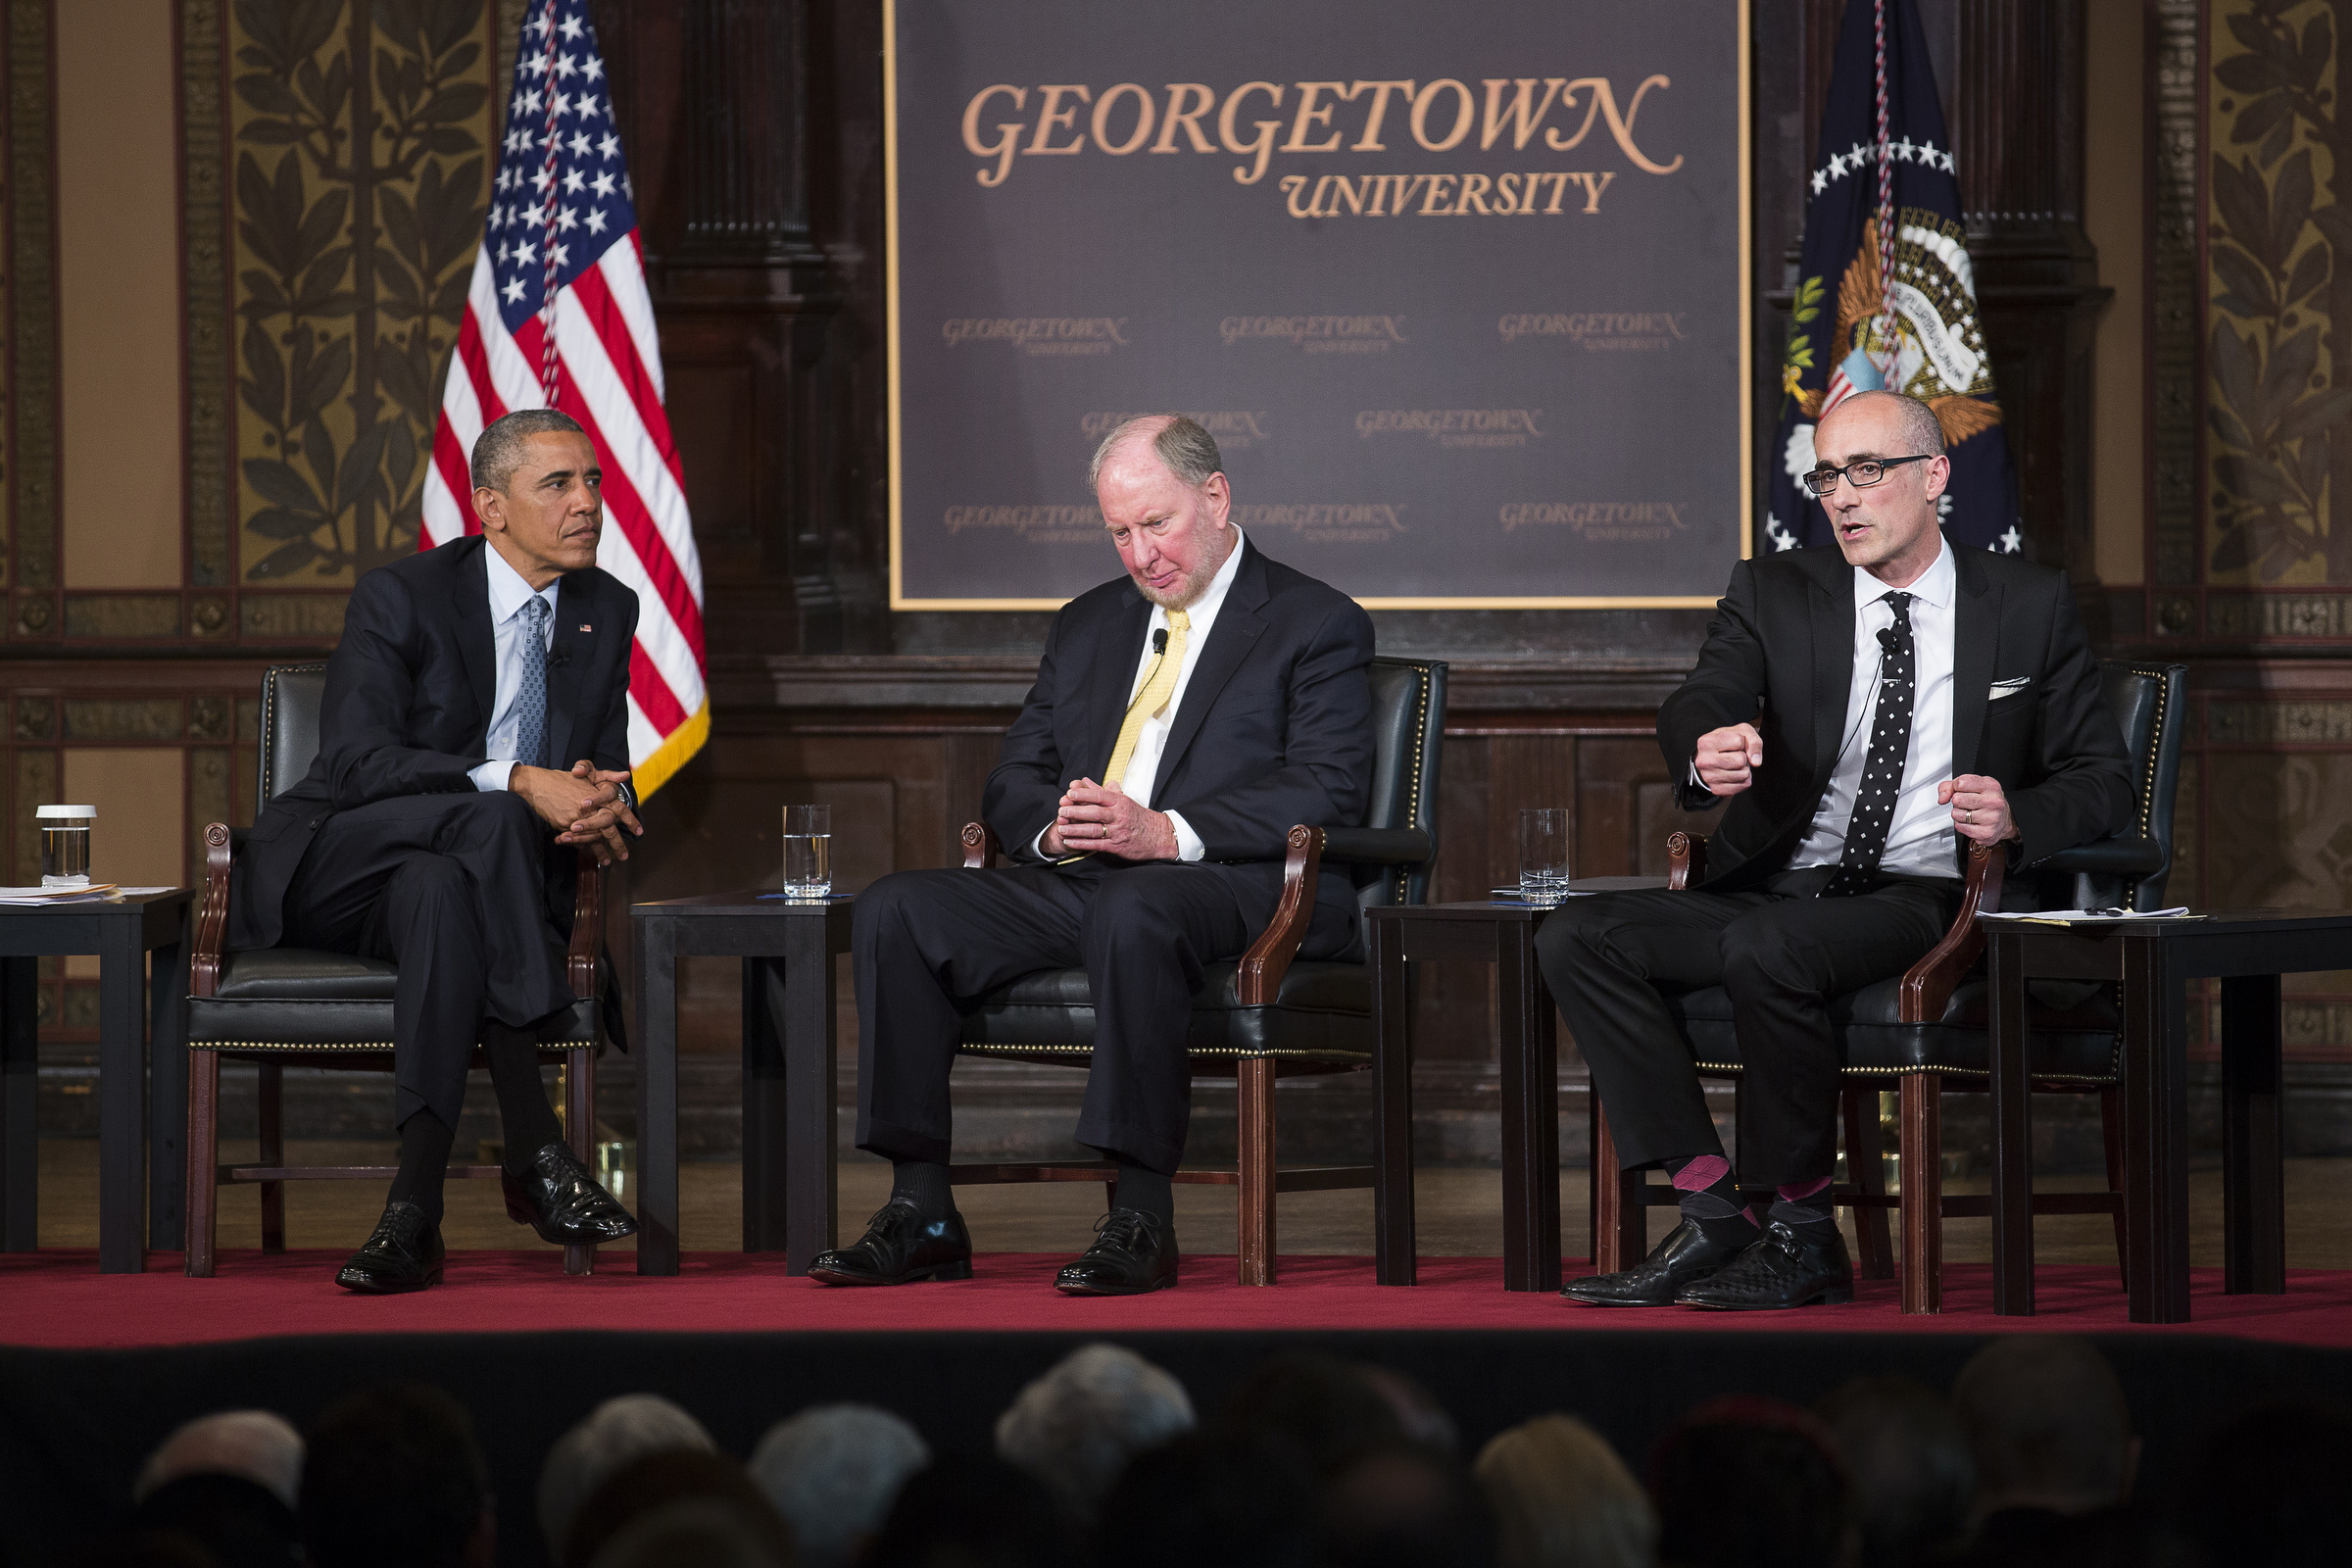 Arthur Brooks, of the American Enterprise Institute, right, talks May 12, 2015, with U.S. President Barack Obama and Robert Putnam of Harvard University during the Catholic-Evangelical Leadership Summit on Overcoming Poverty at Georgetown University in Washington. (CNS/Tyler Orsburn)